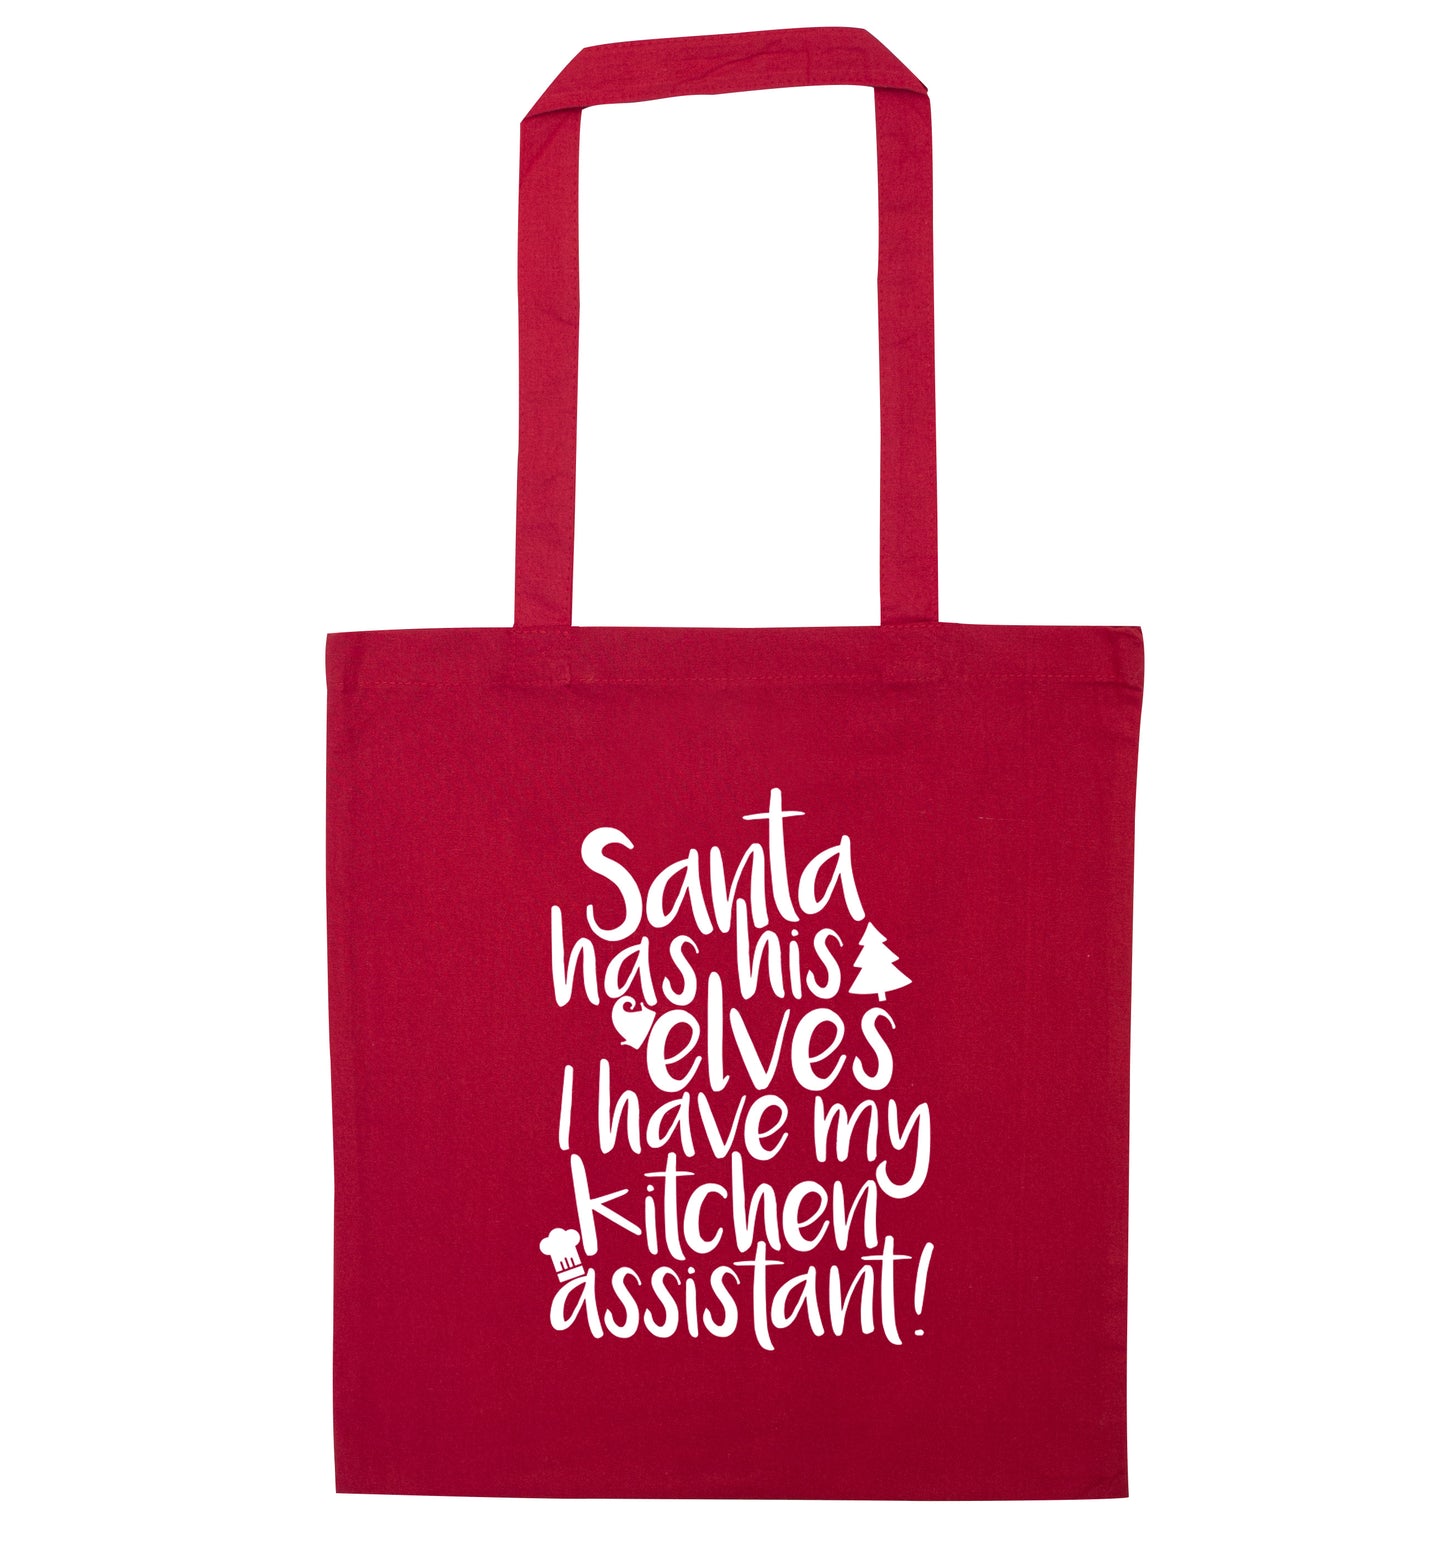 Santa has his elves I have my kitchen assistant red tote bag